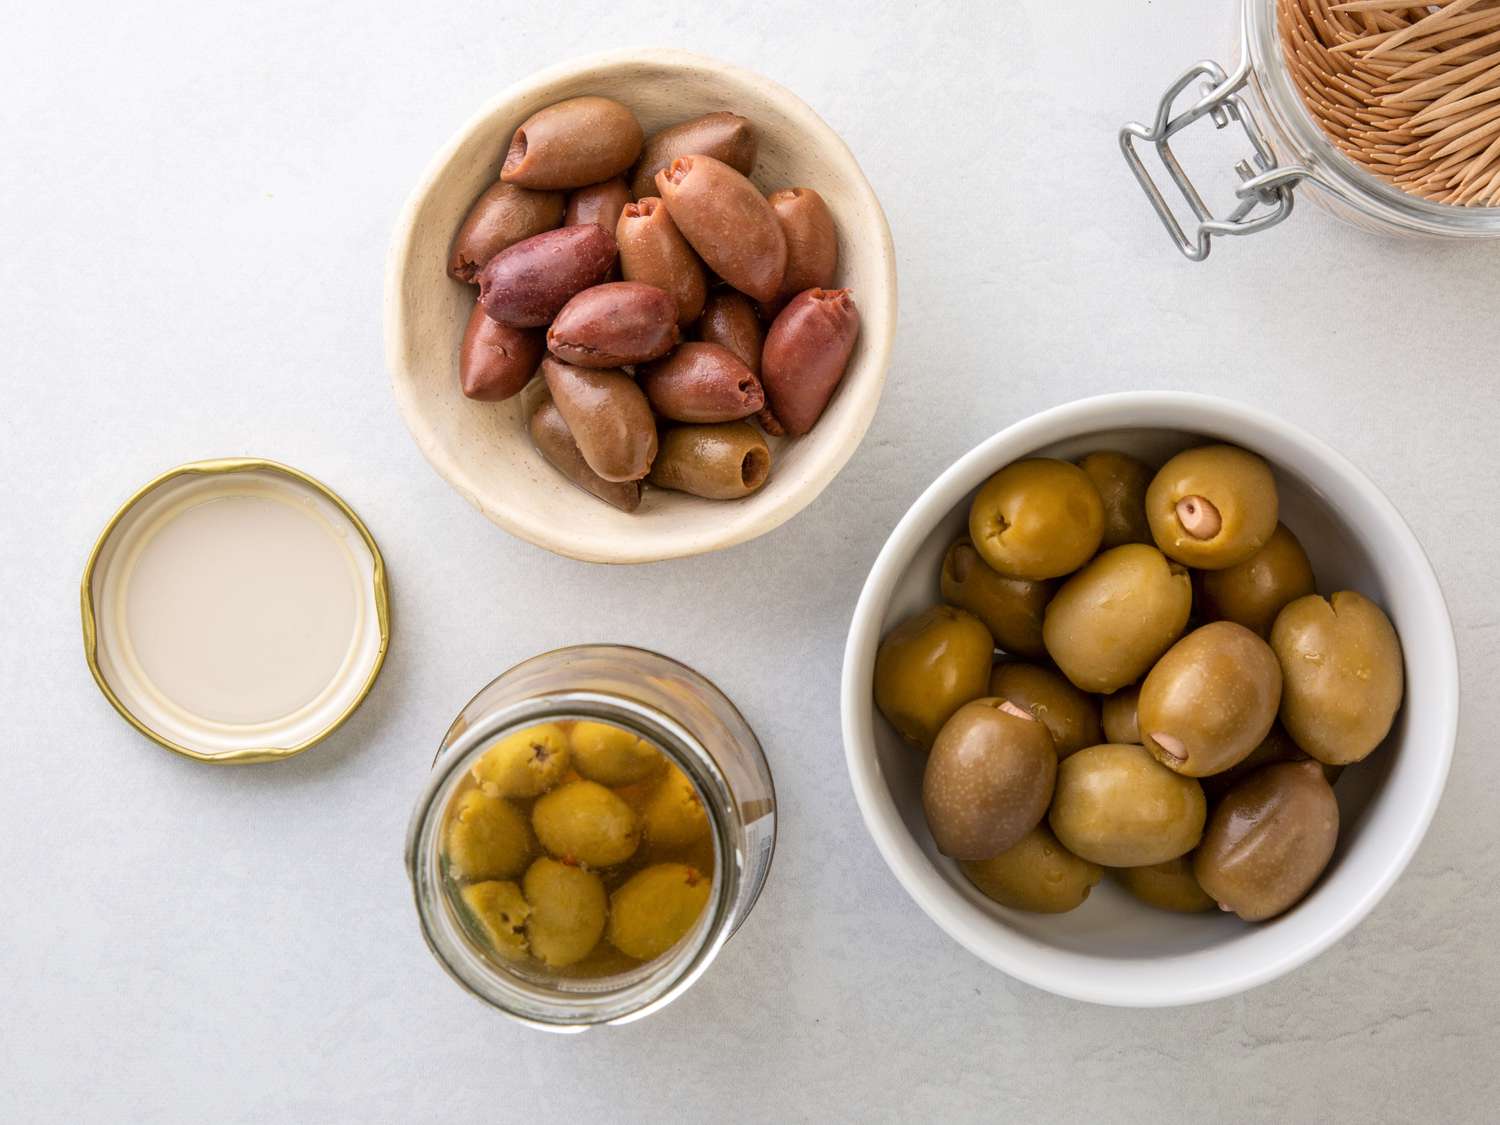 The Shocking Truth About Expired Olives